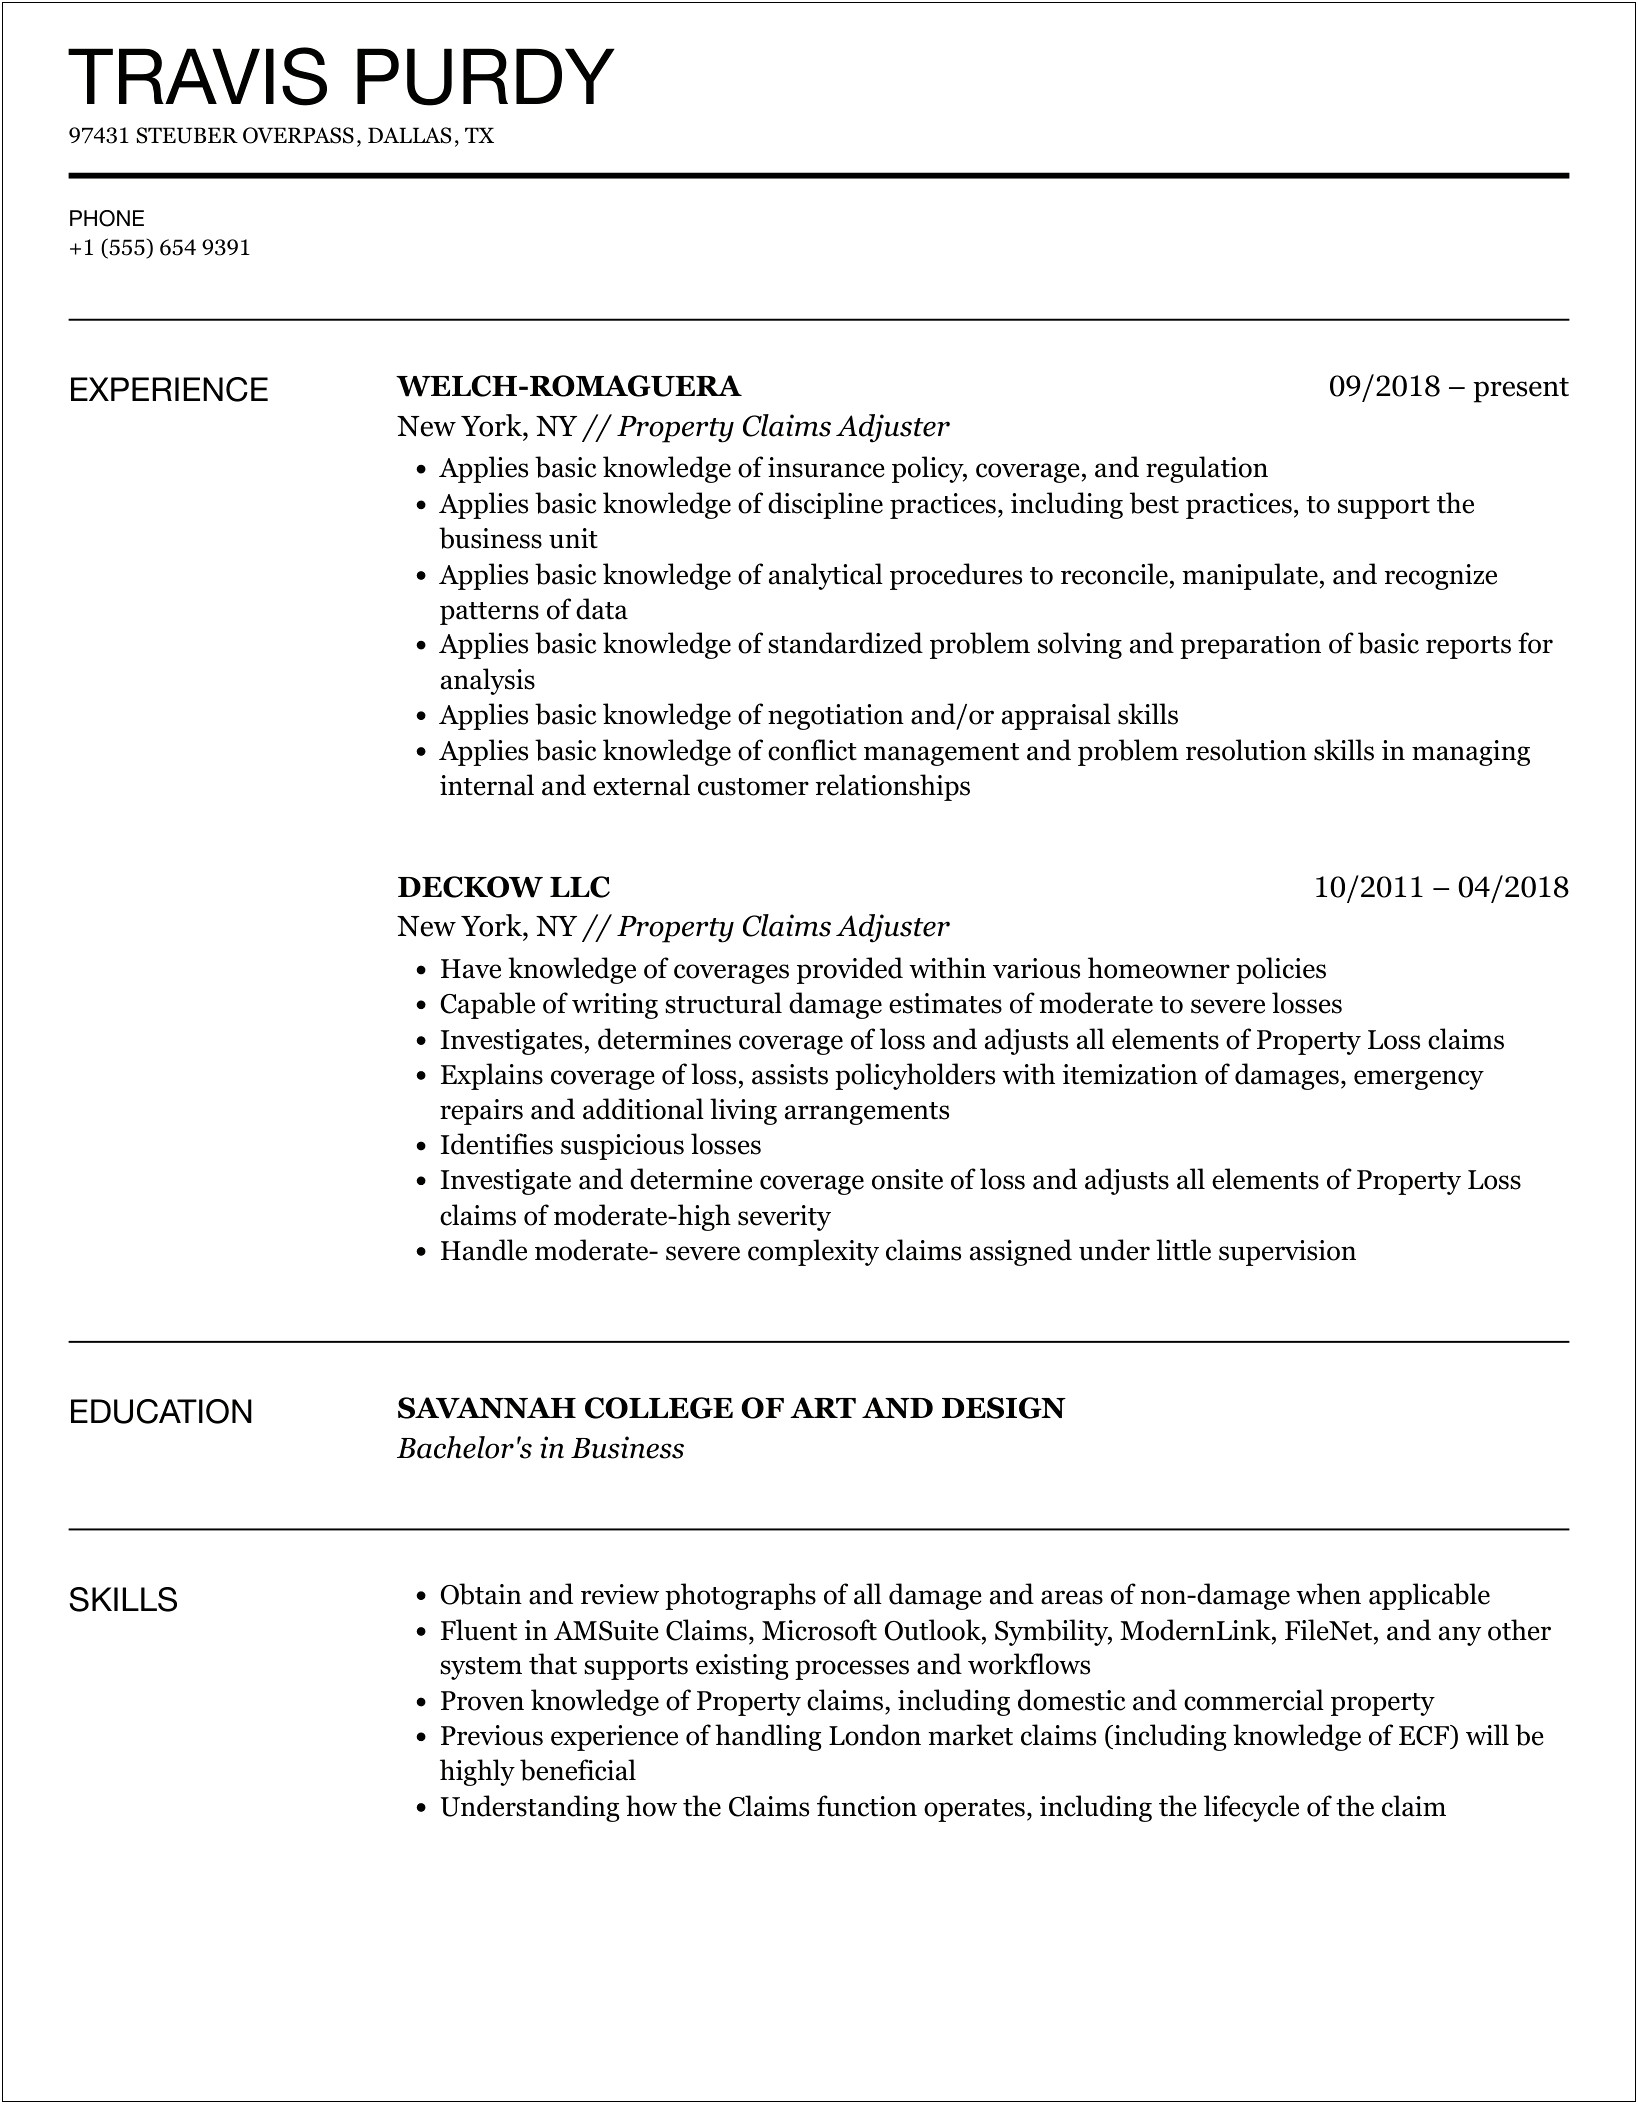 Sample Resume For Entry Level Claims Adjuster